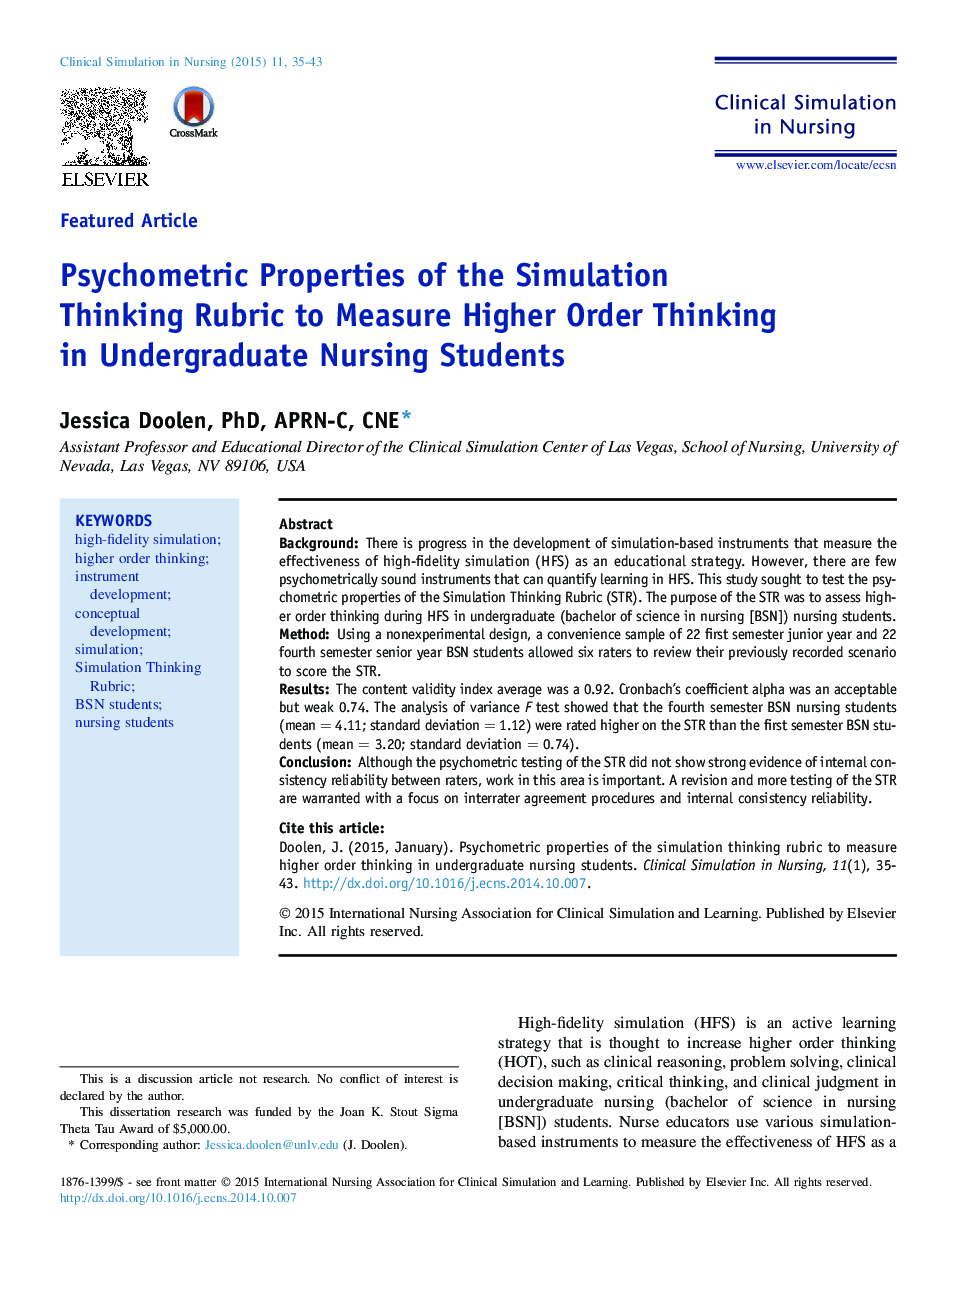 Psychometric Properties of the Simulation Thinking Rubric to Measure Higher Order Thinking in Undergraduate Nursing Students 